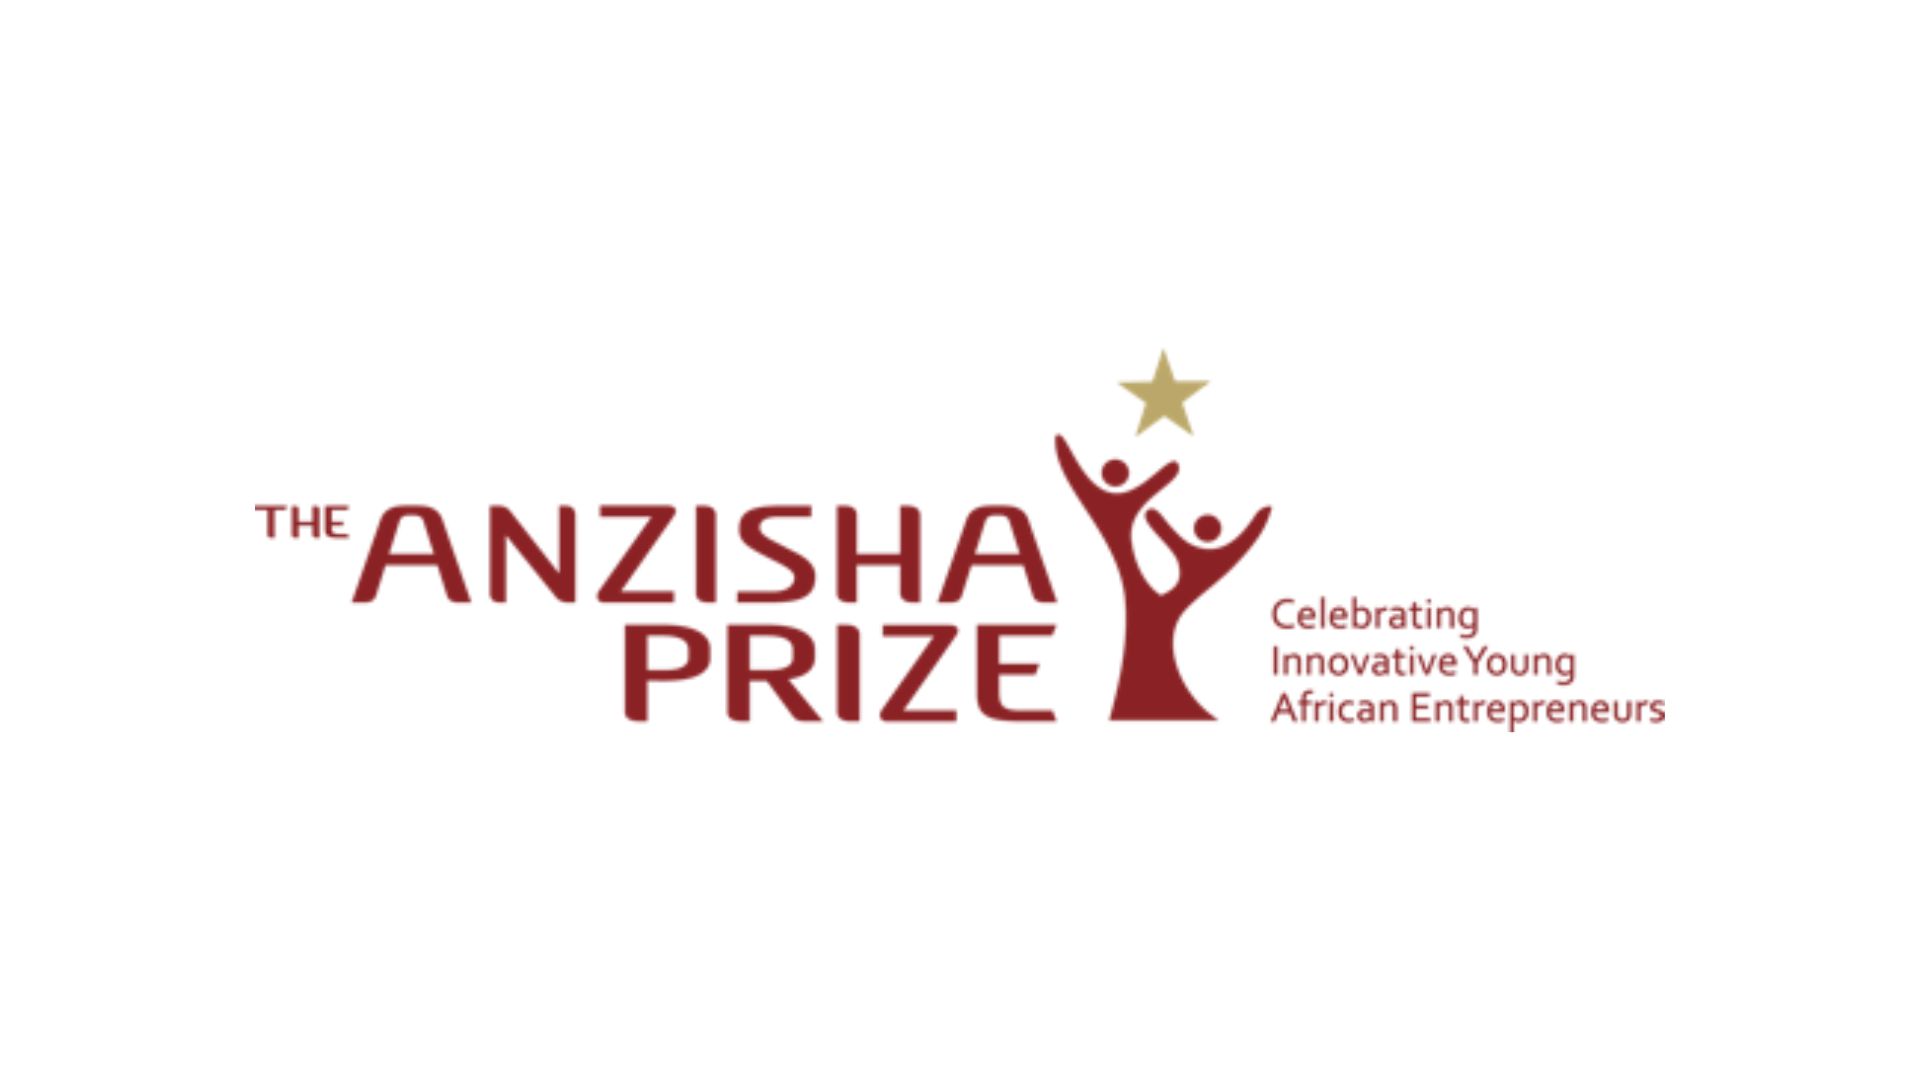 Africans entrepreneurs aged 15 to 22 urged to apply for $50,000 ANZISHA Prize